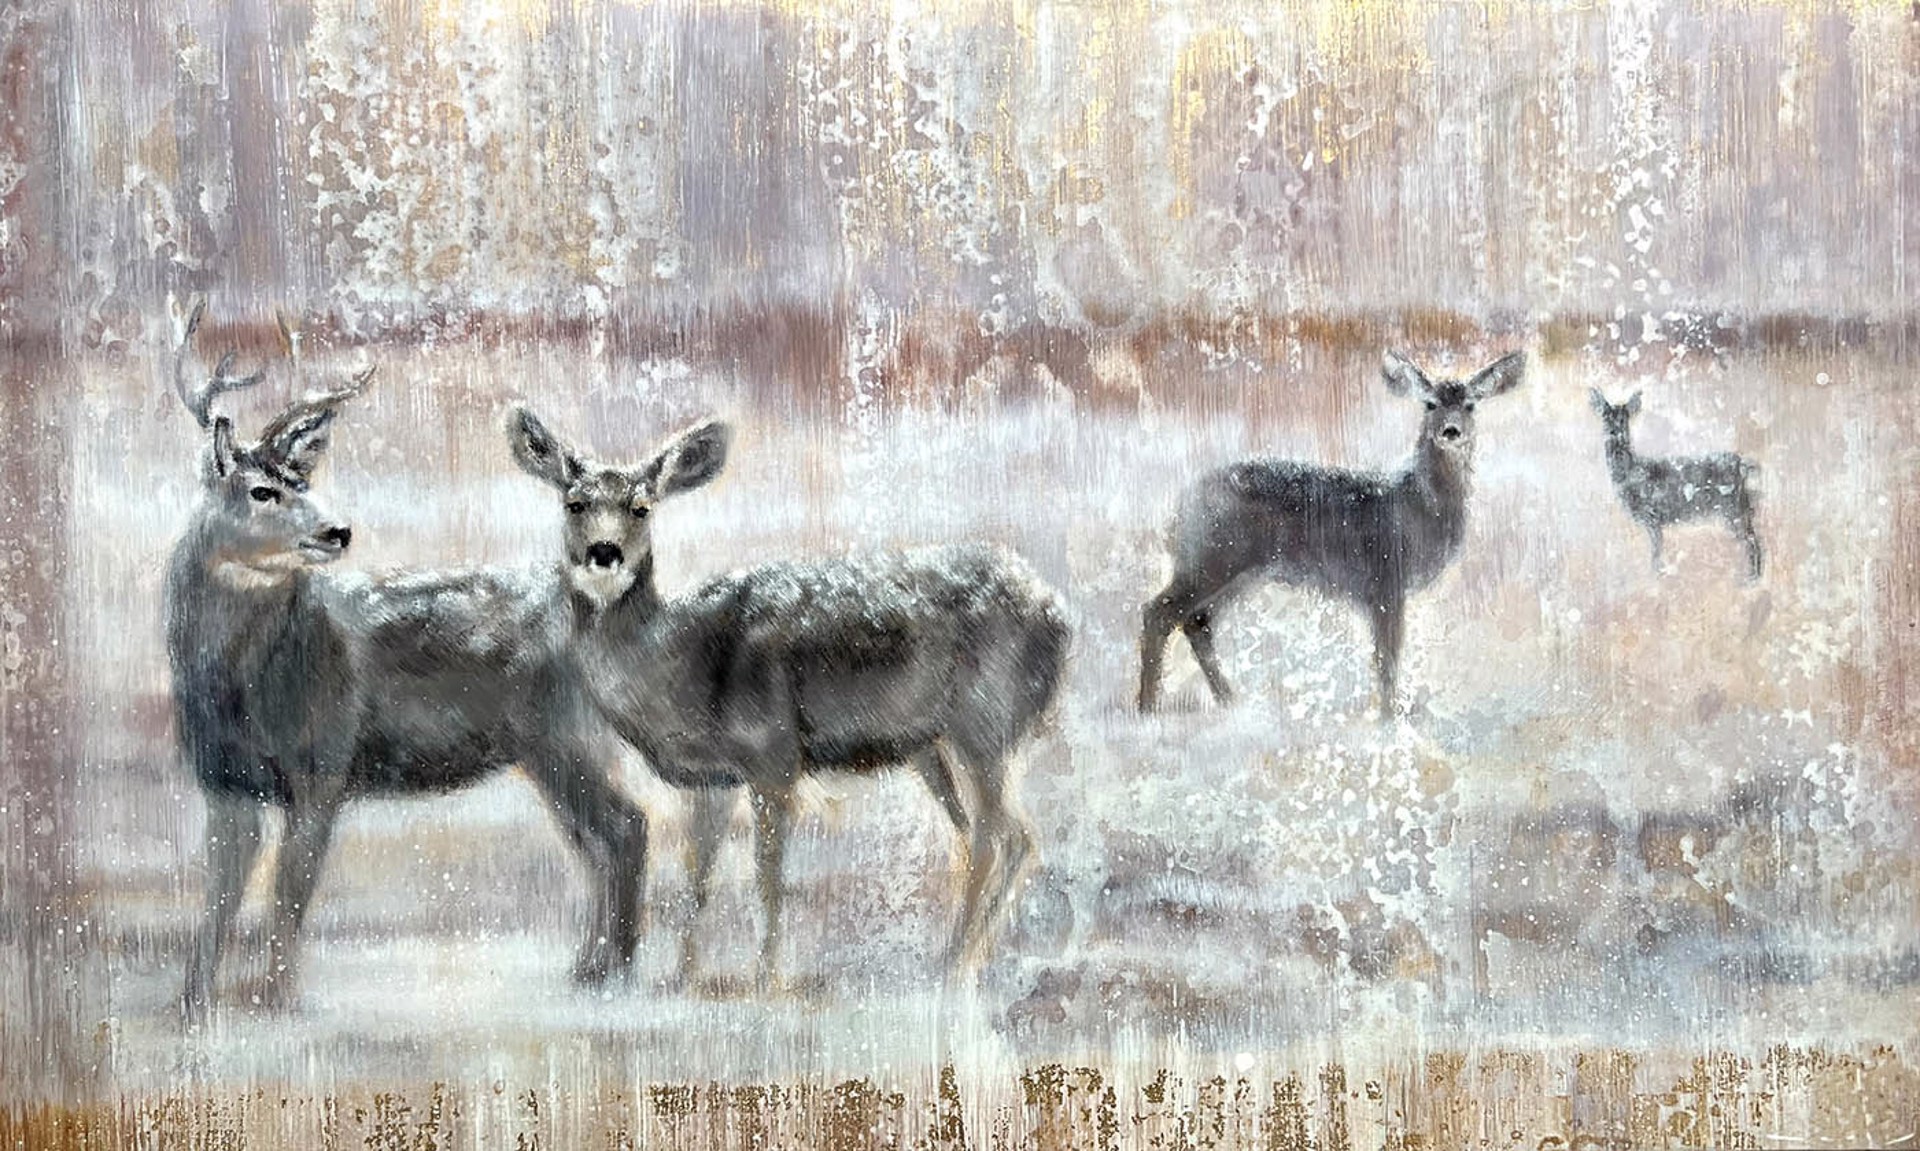 Original Acrylic Painting By Nealy Riley Featuring A Herd Of Deer Over Abstracted Landscape Background In Neutral Tones With Gold Leaf Details